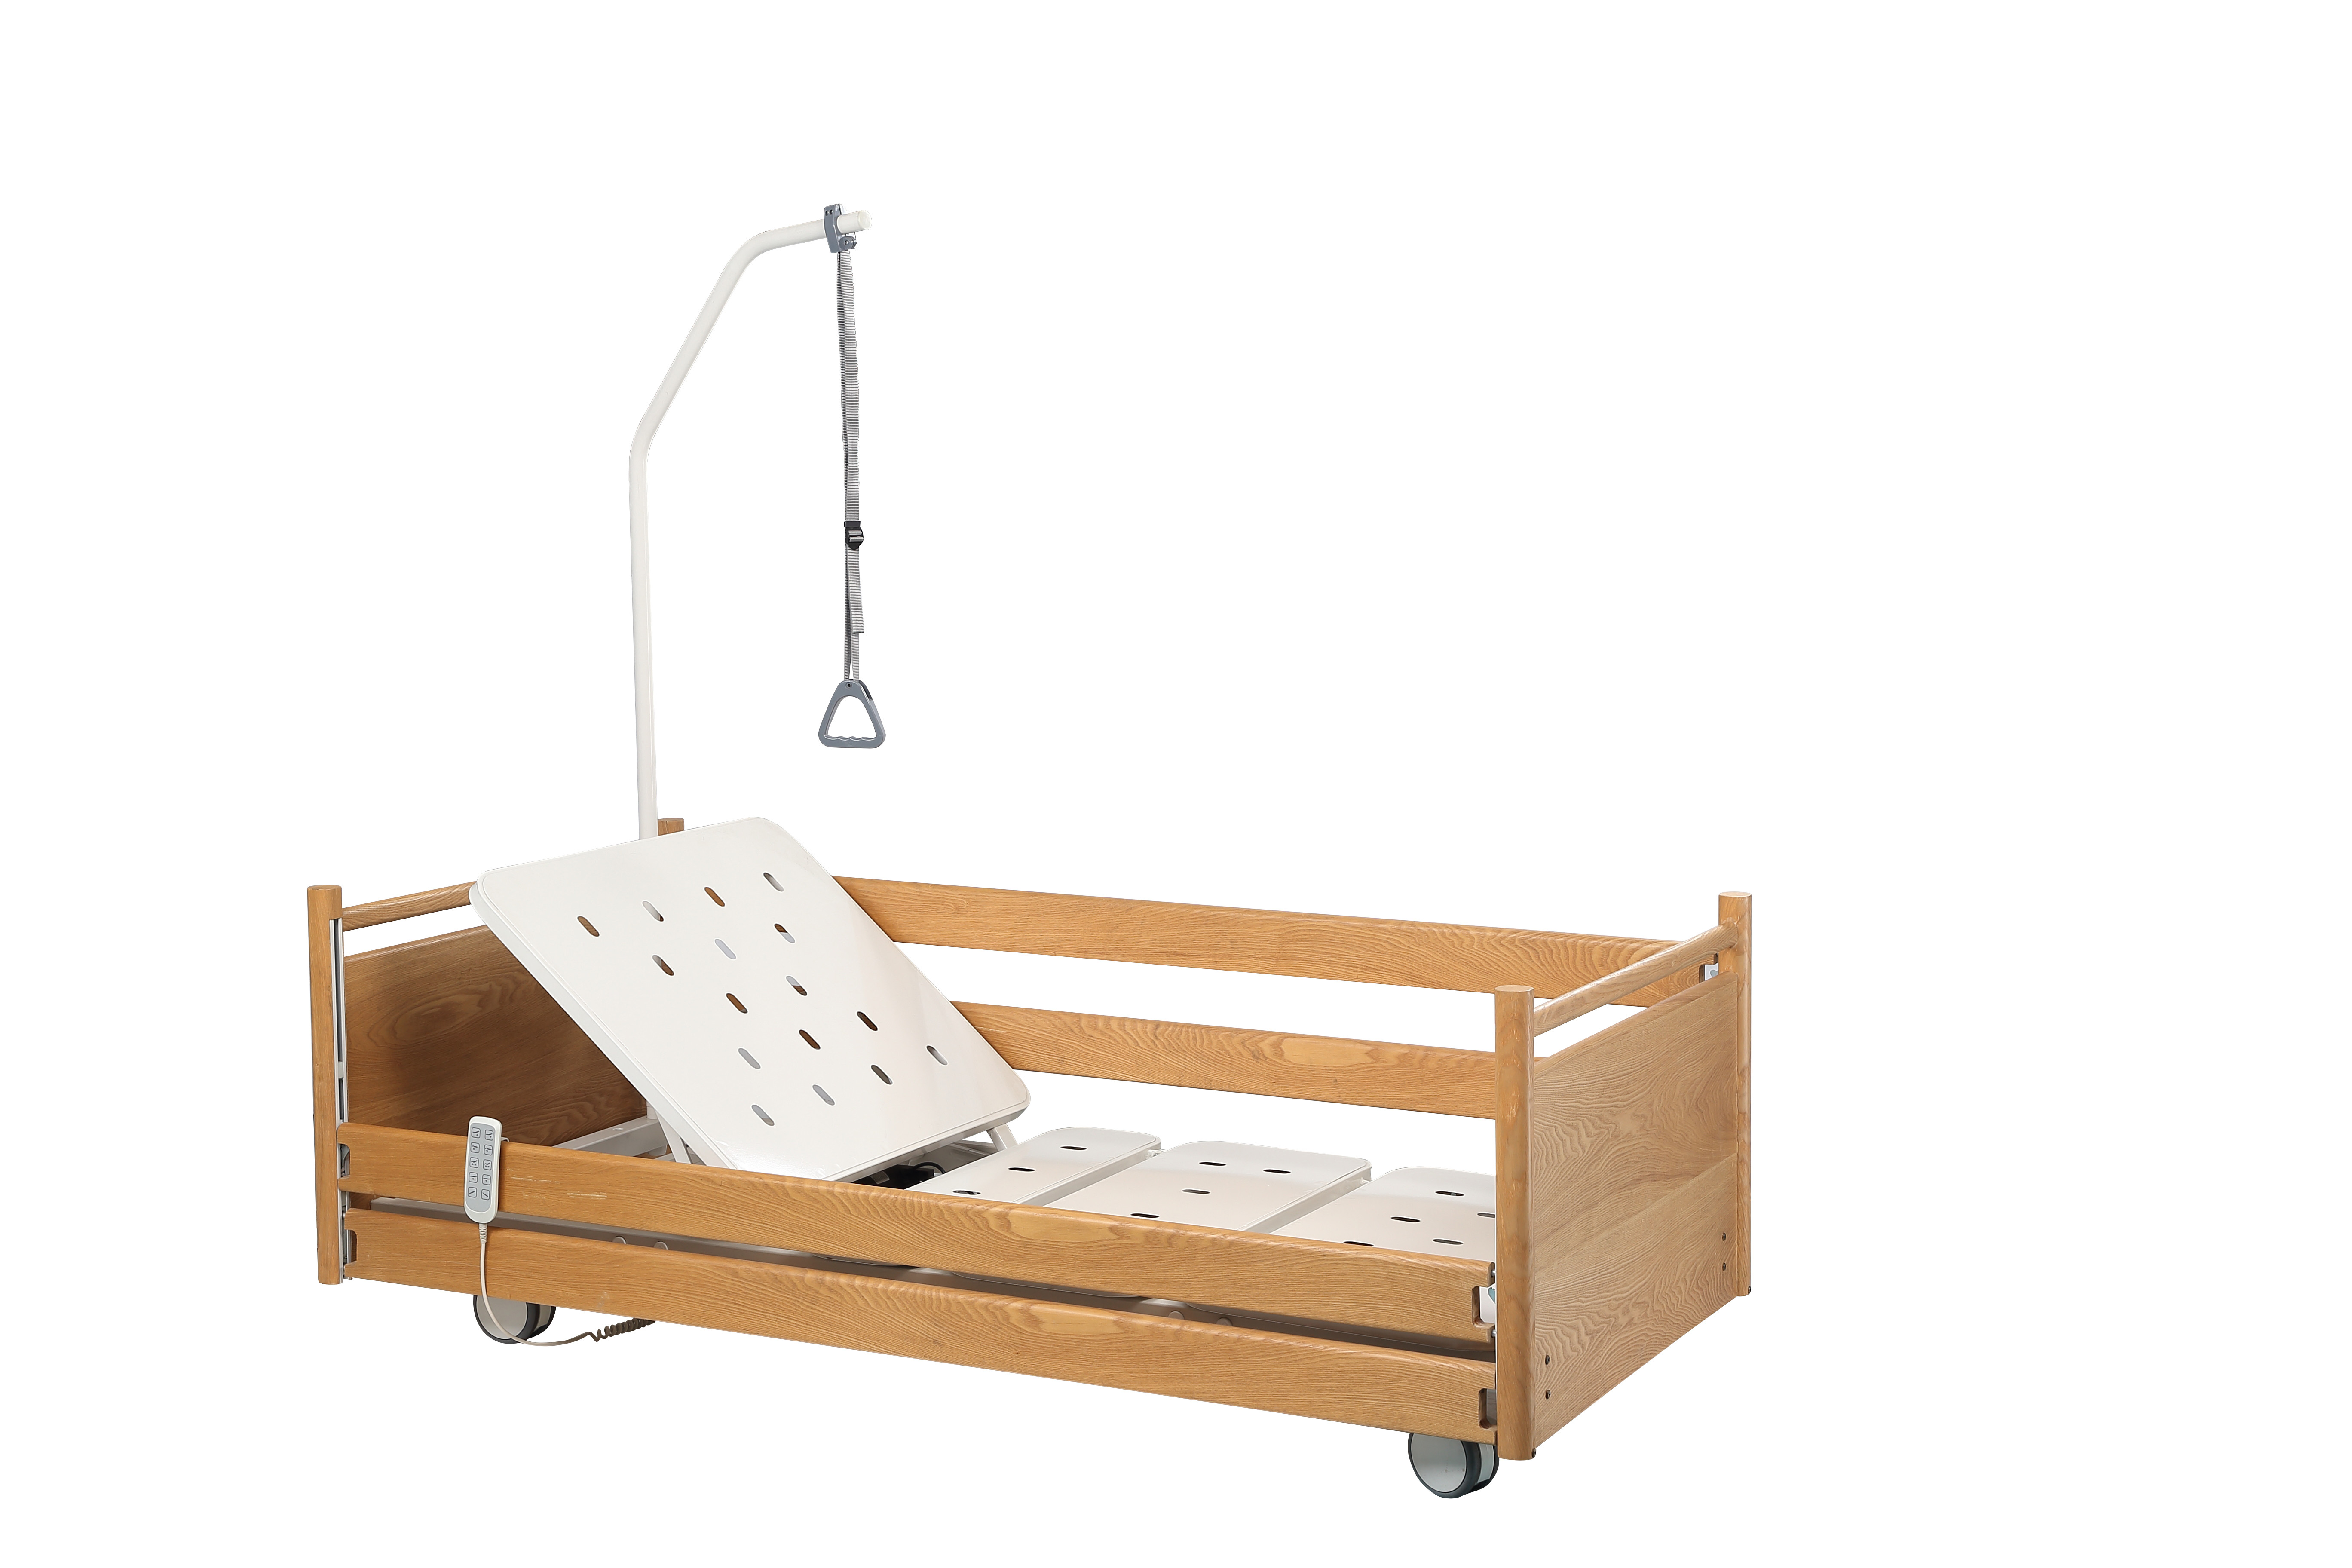  2190 * 970 * 300 - 760mm Home Care Bed For Paralysis Patient Wooden Handrails Manufactures